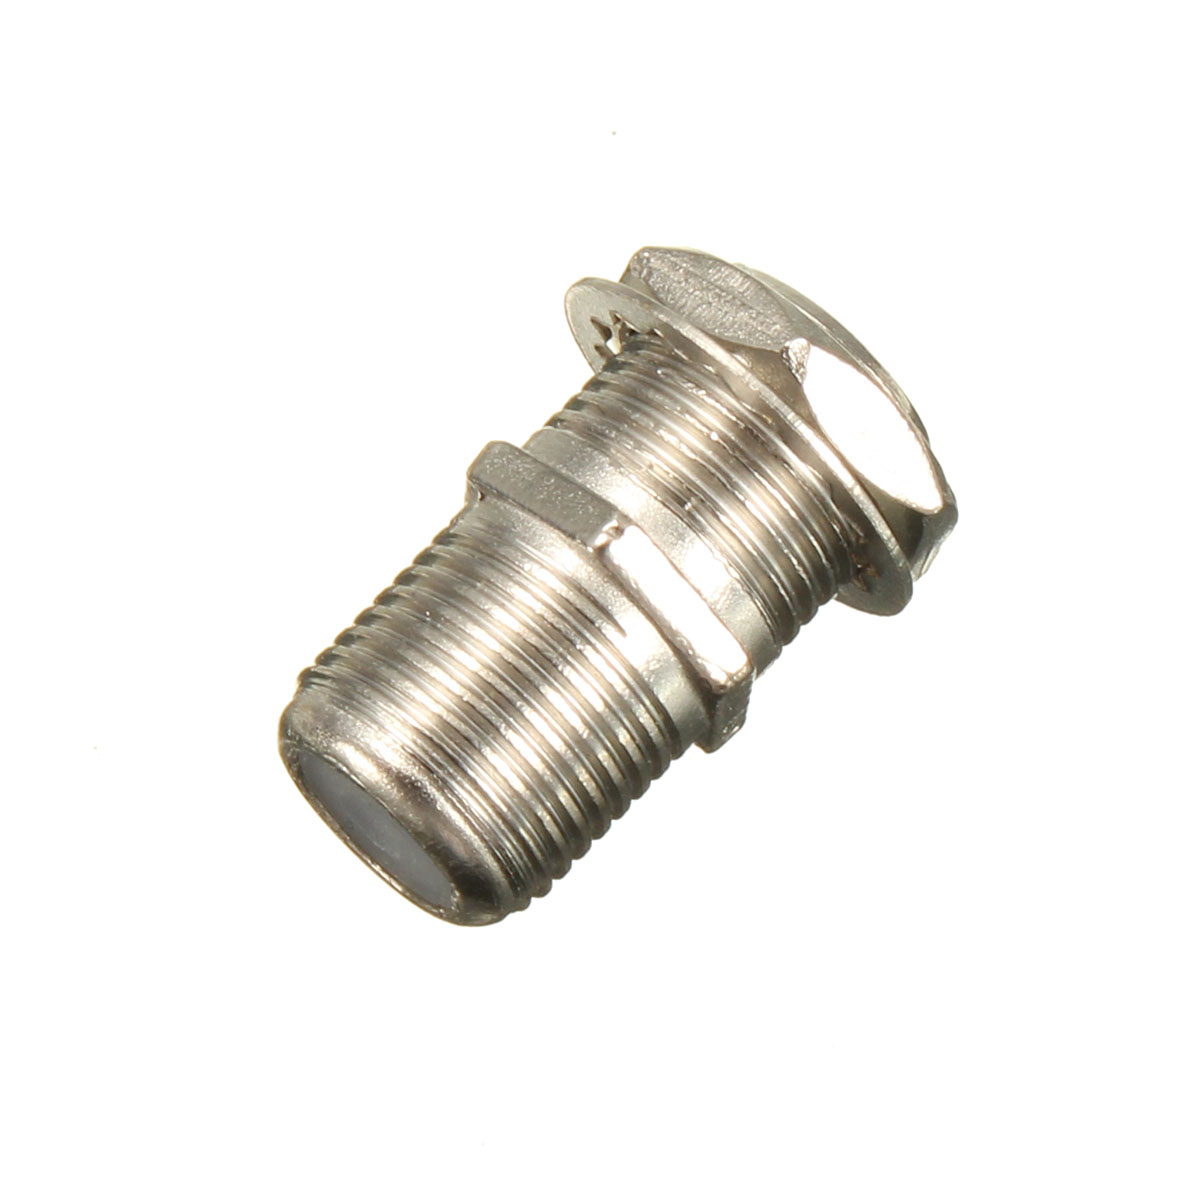 10-pcs-F-Type-Plug-Extend-Cable-TV-Coax-Coaxial-Connectors-Cable-Connector-Adapter-F-to-F-Female-1383729